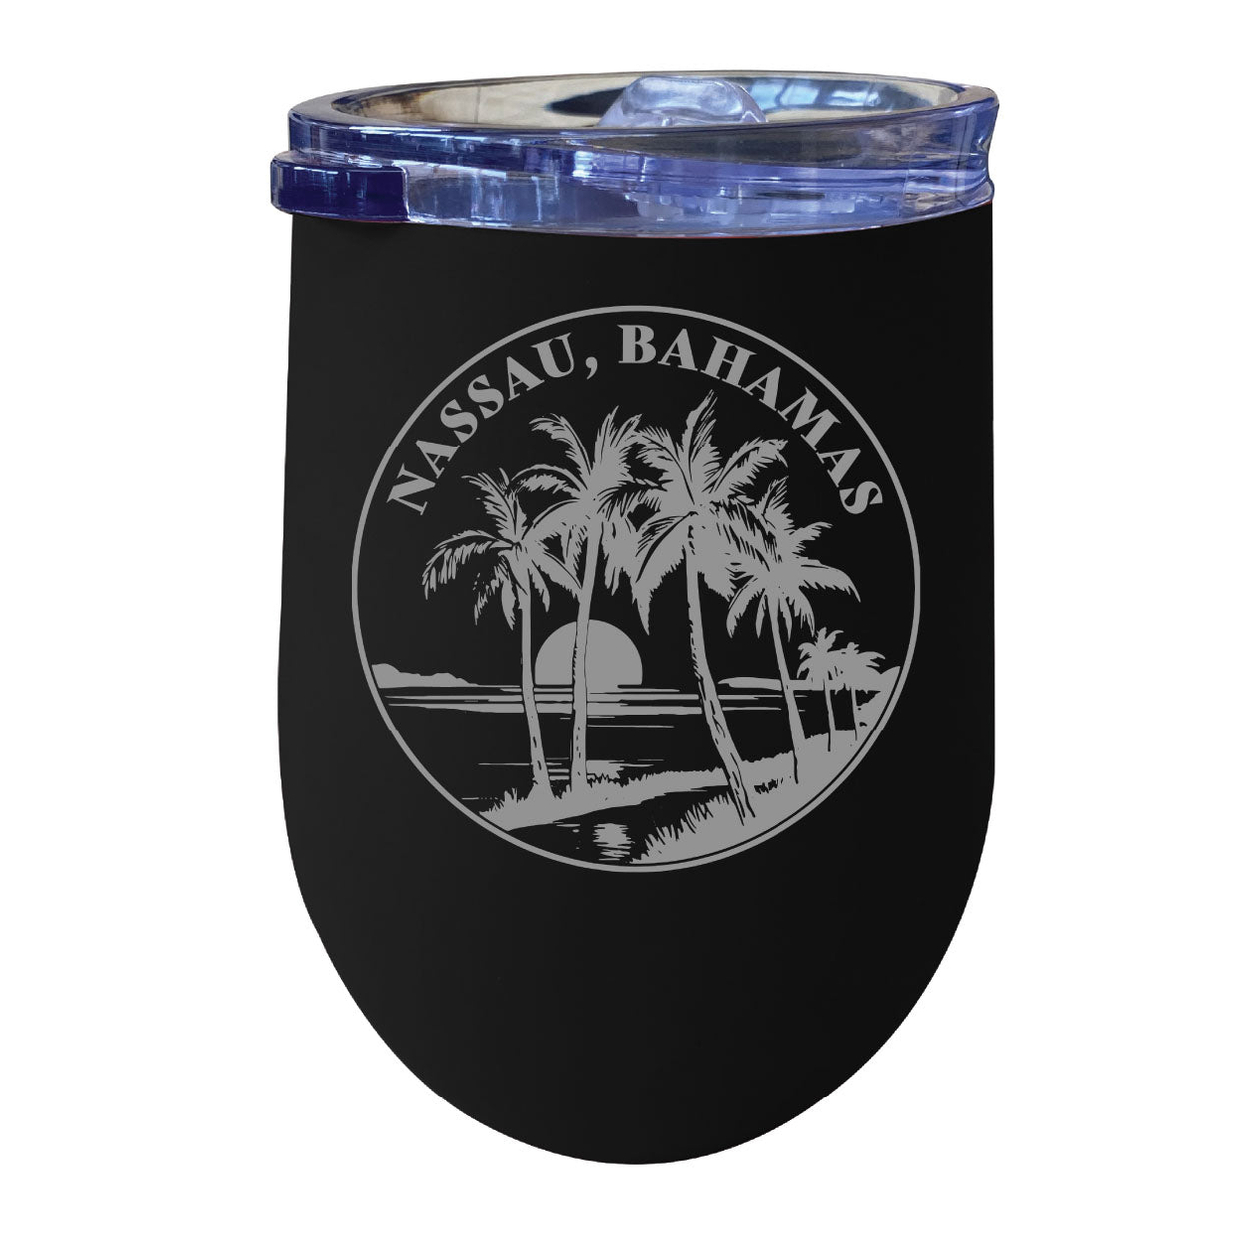 Nassau The Bahamas Souvenir 12 Oz Engraved Insulated Wine Stainless Steel Tumbler - Black,,2-Pack